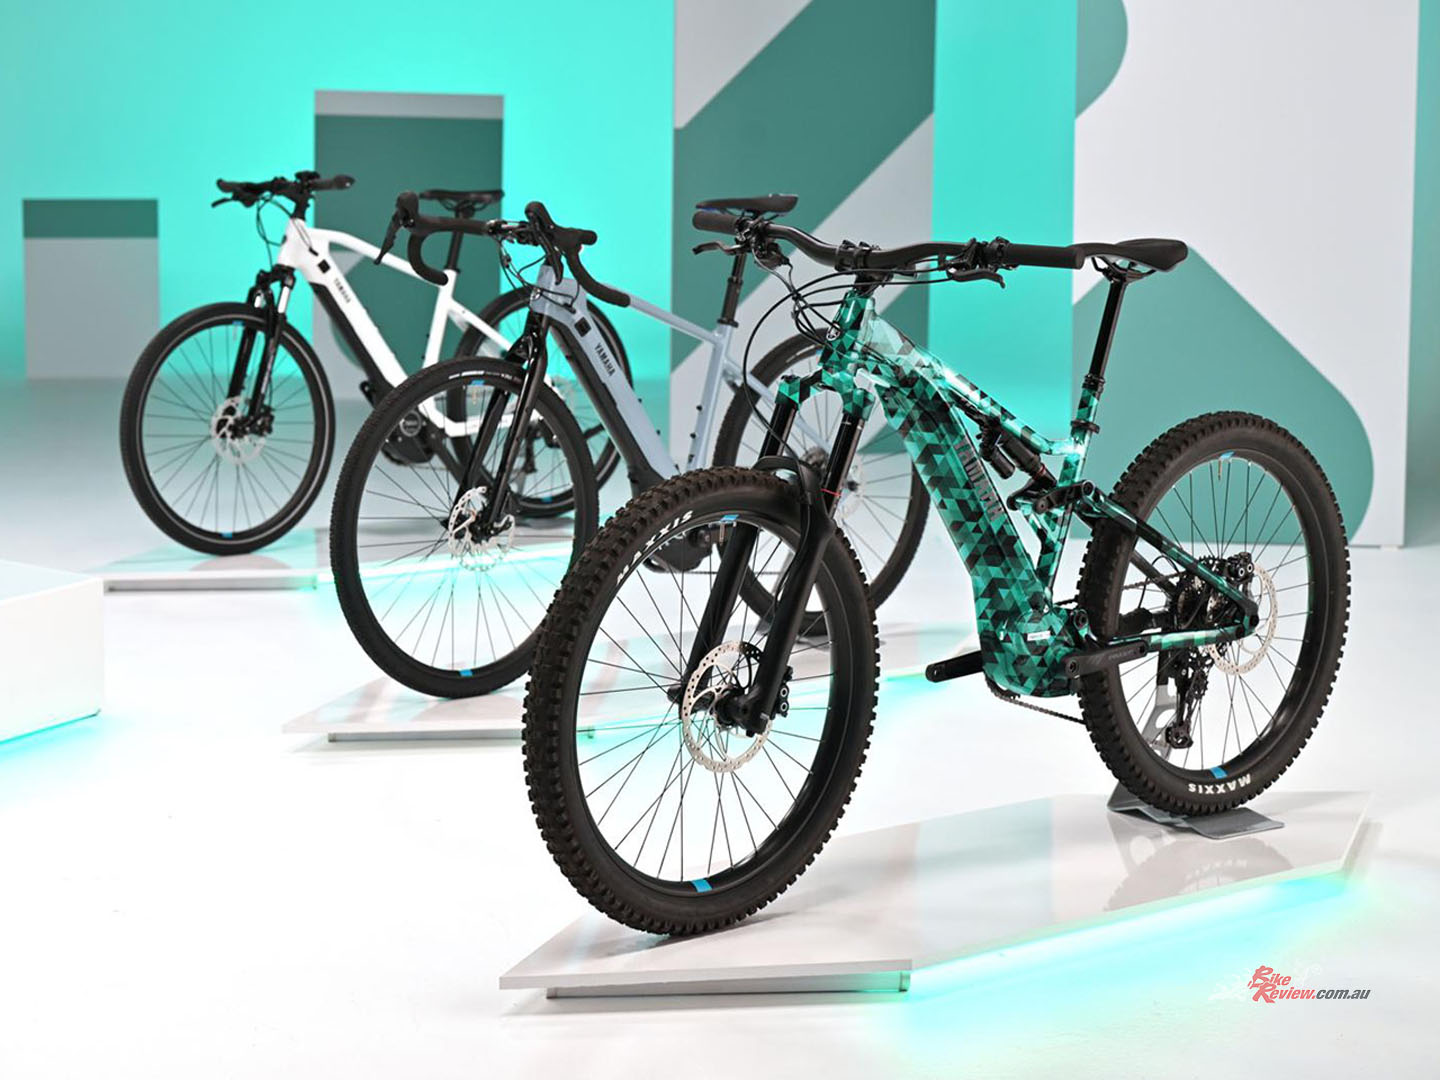 Yamaha international recently announced an all new electric bike line-up. Making the switch to EV, the company showed off two new electric scooters and four eBikes